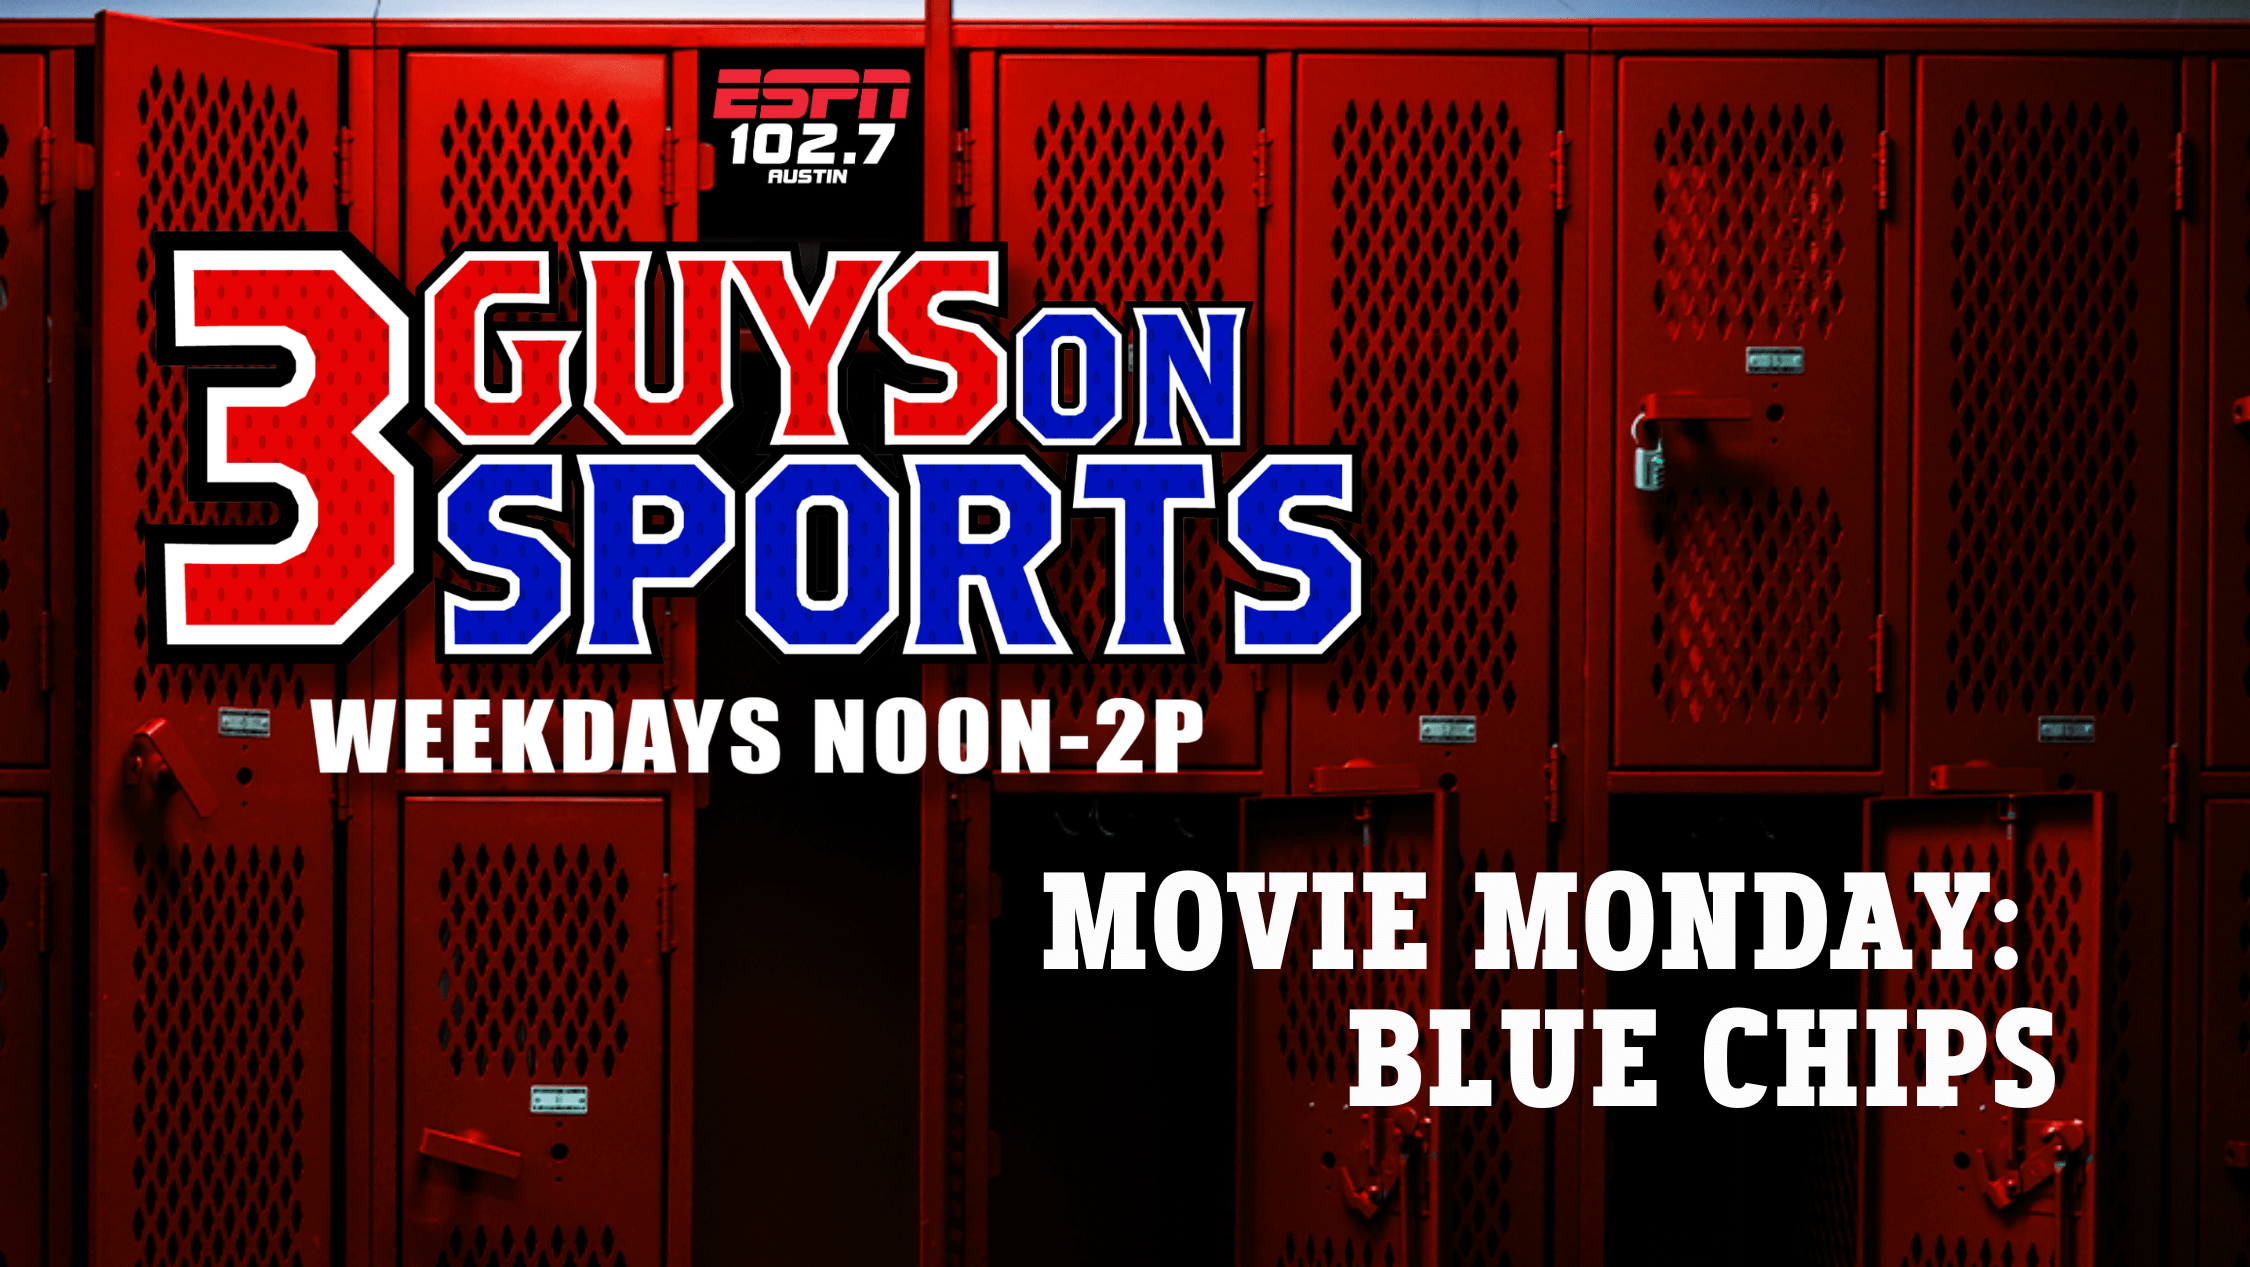 3 Guys on Sports - Movie Monday: Blue Chips